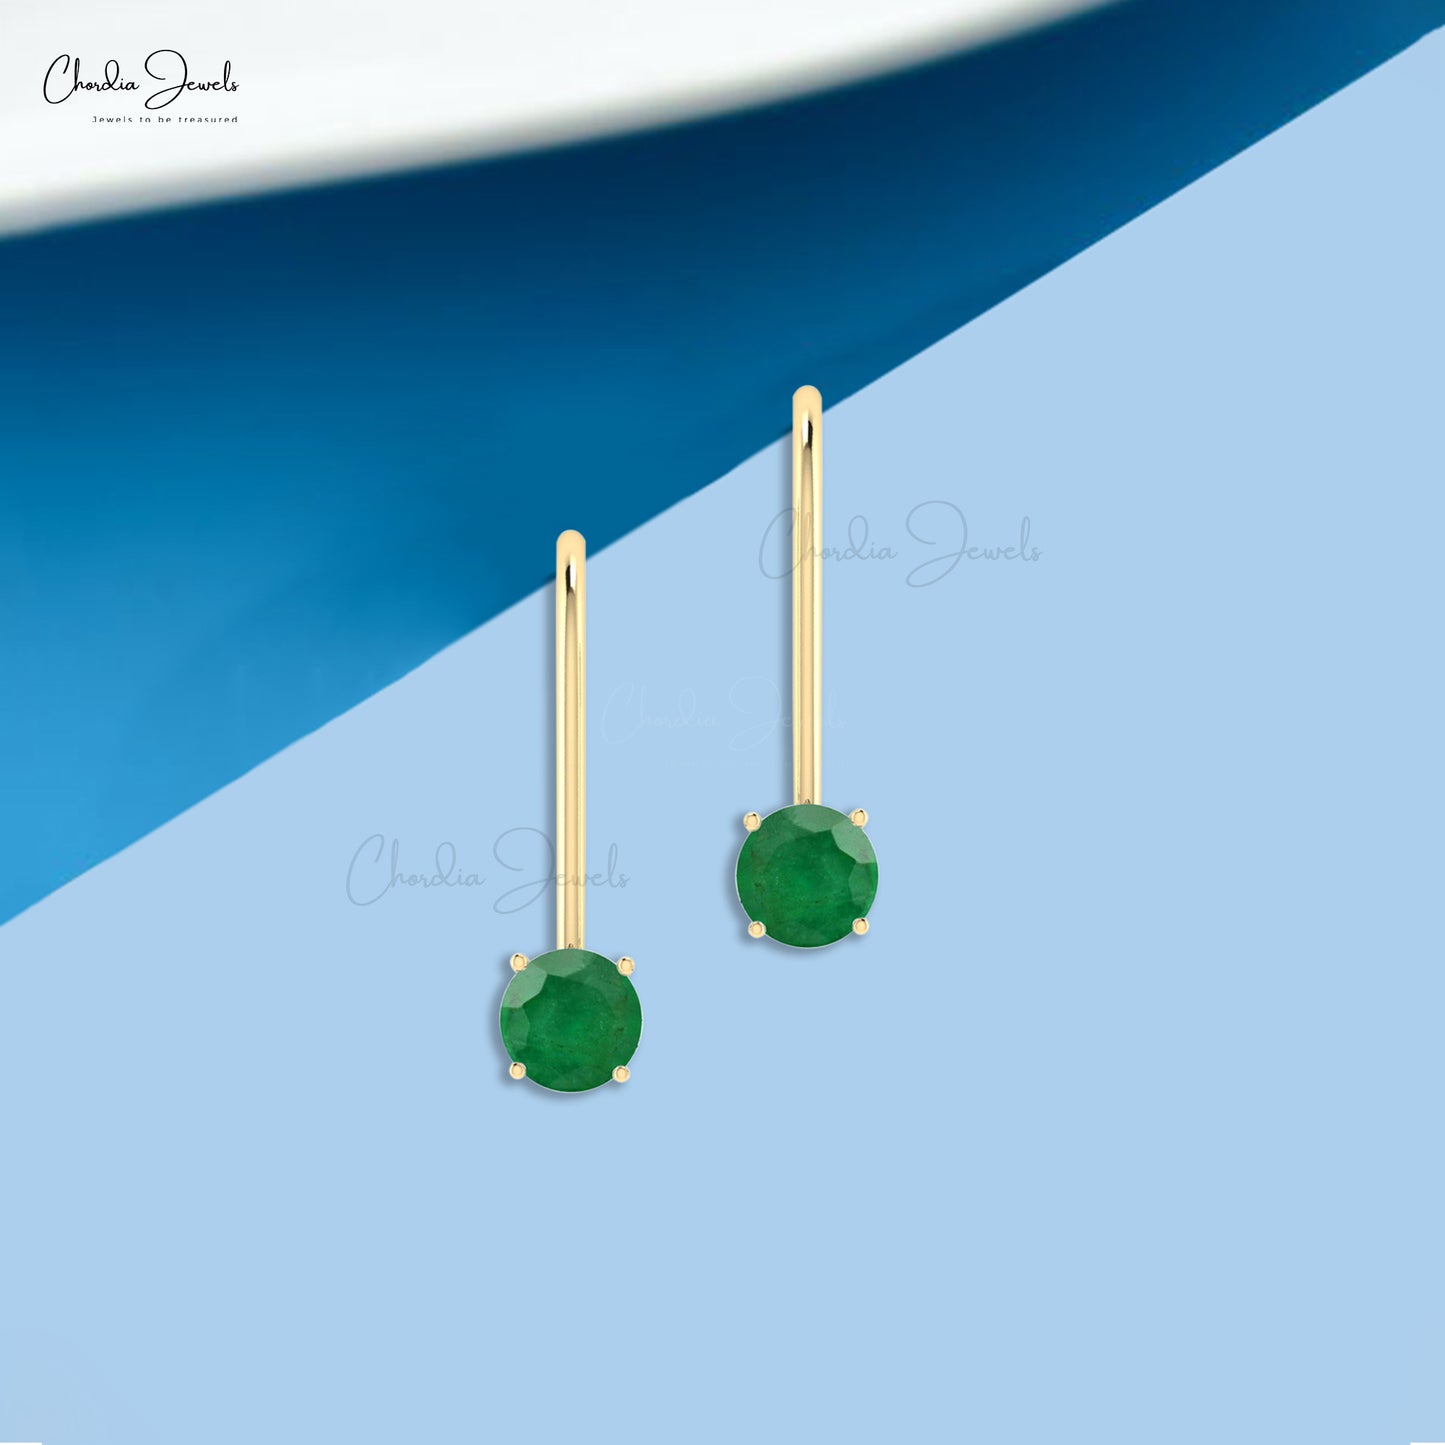 Make a statement with these real emerald earrings.